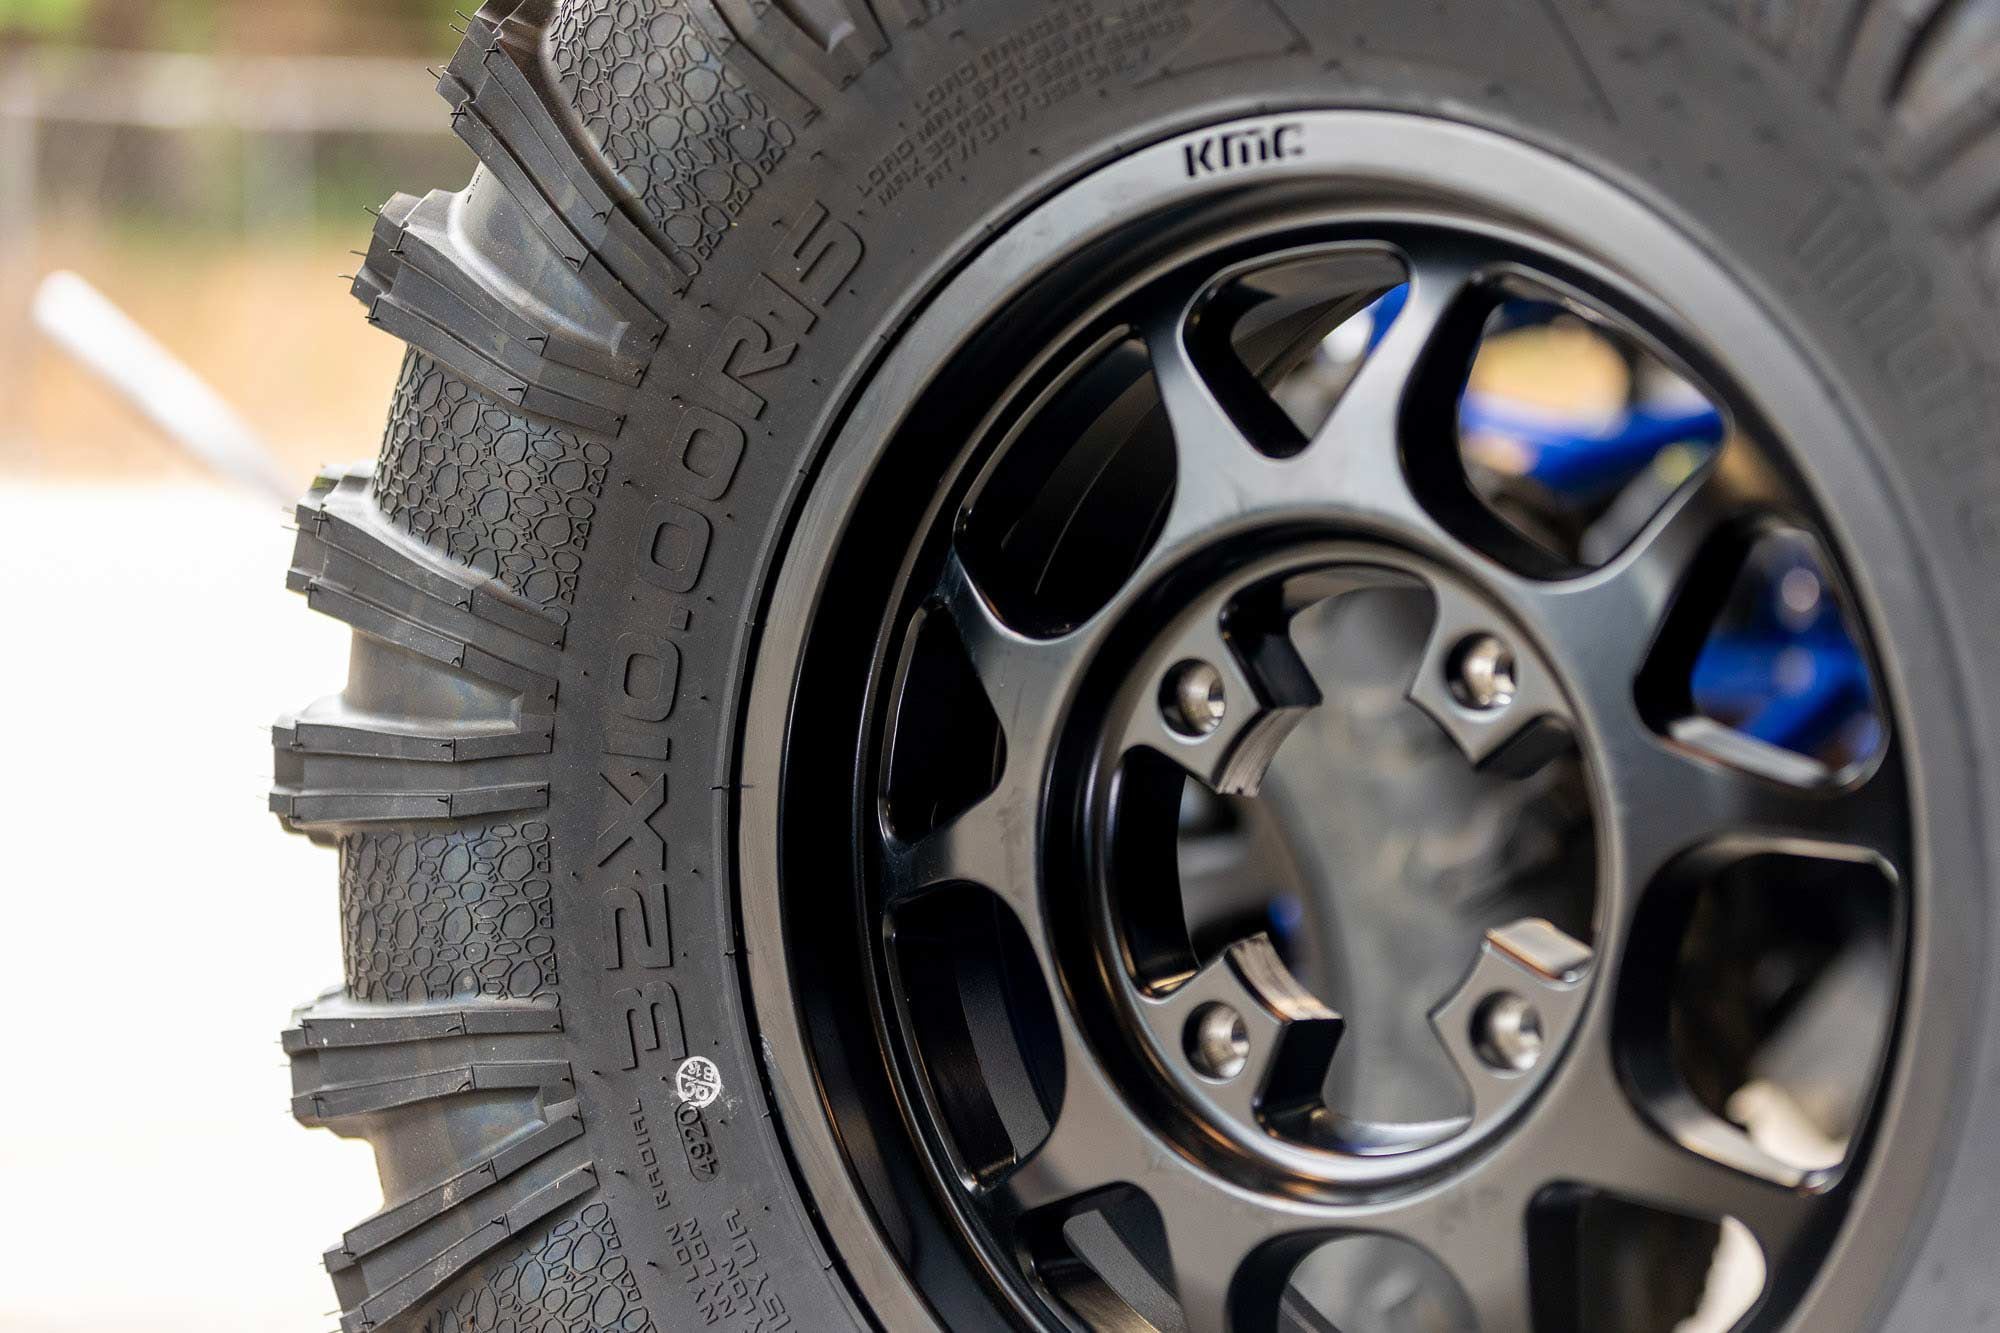 Upgrade those rotating bits for better traction or bigger bling.